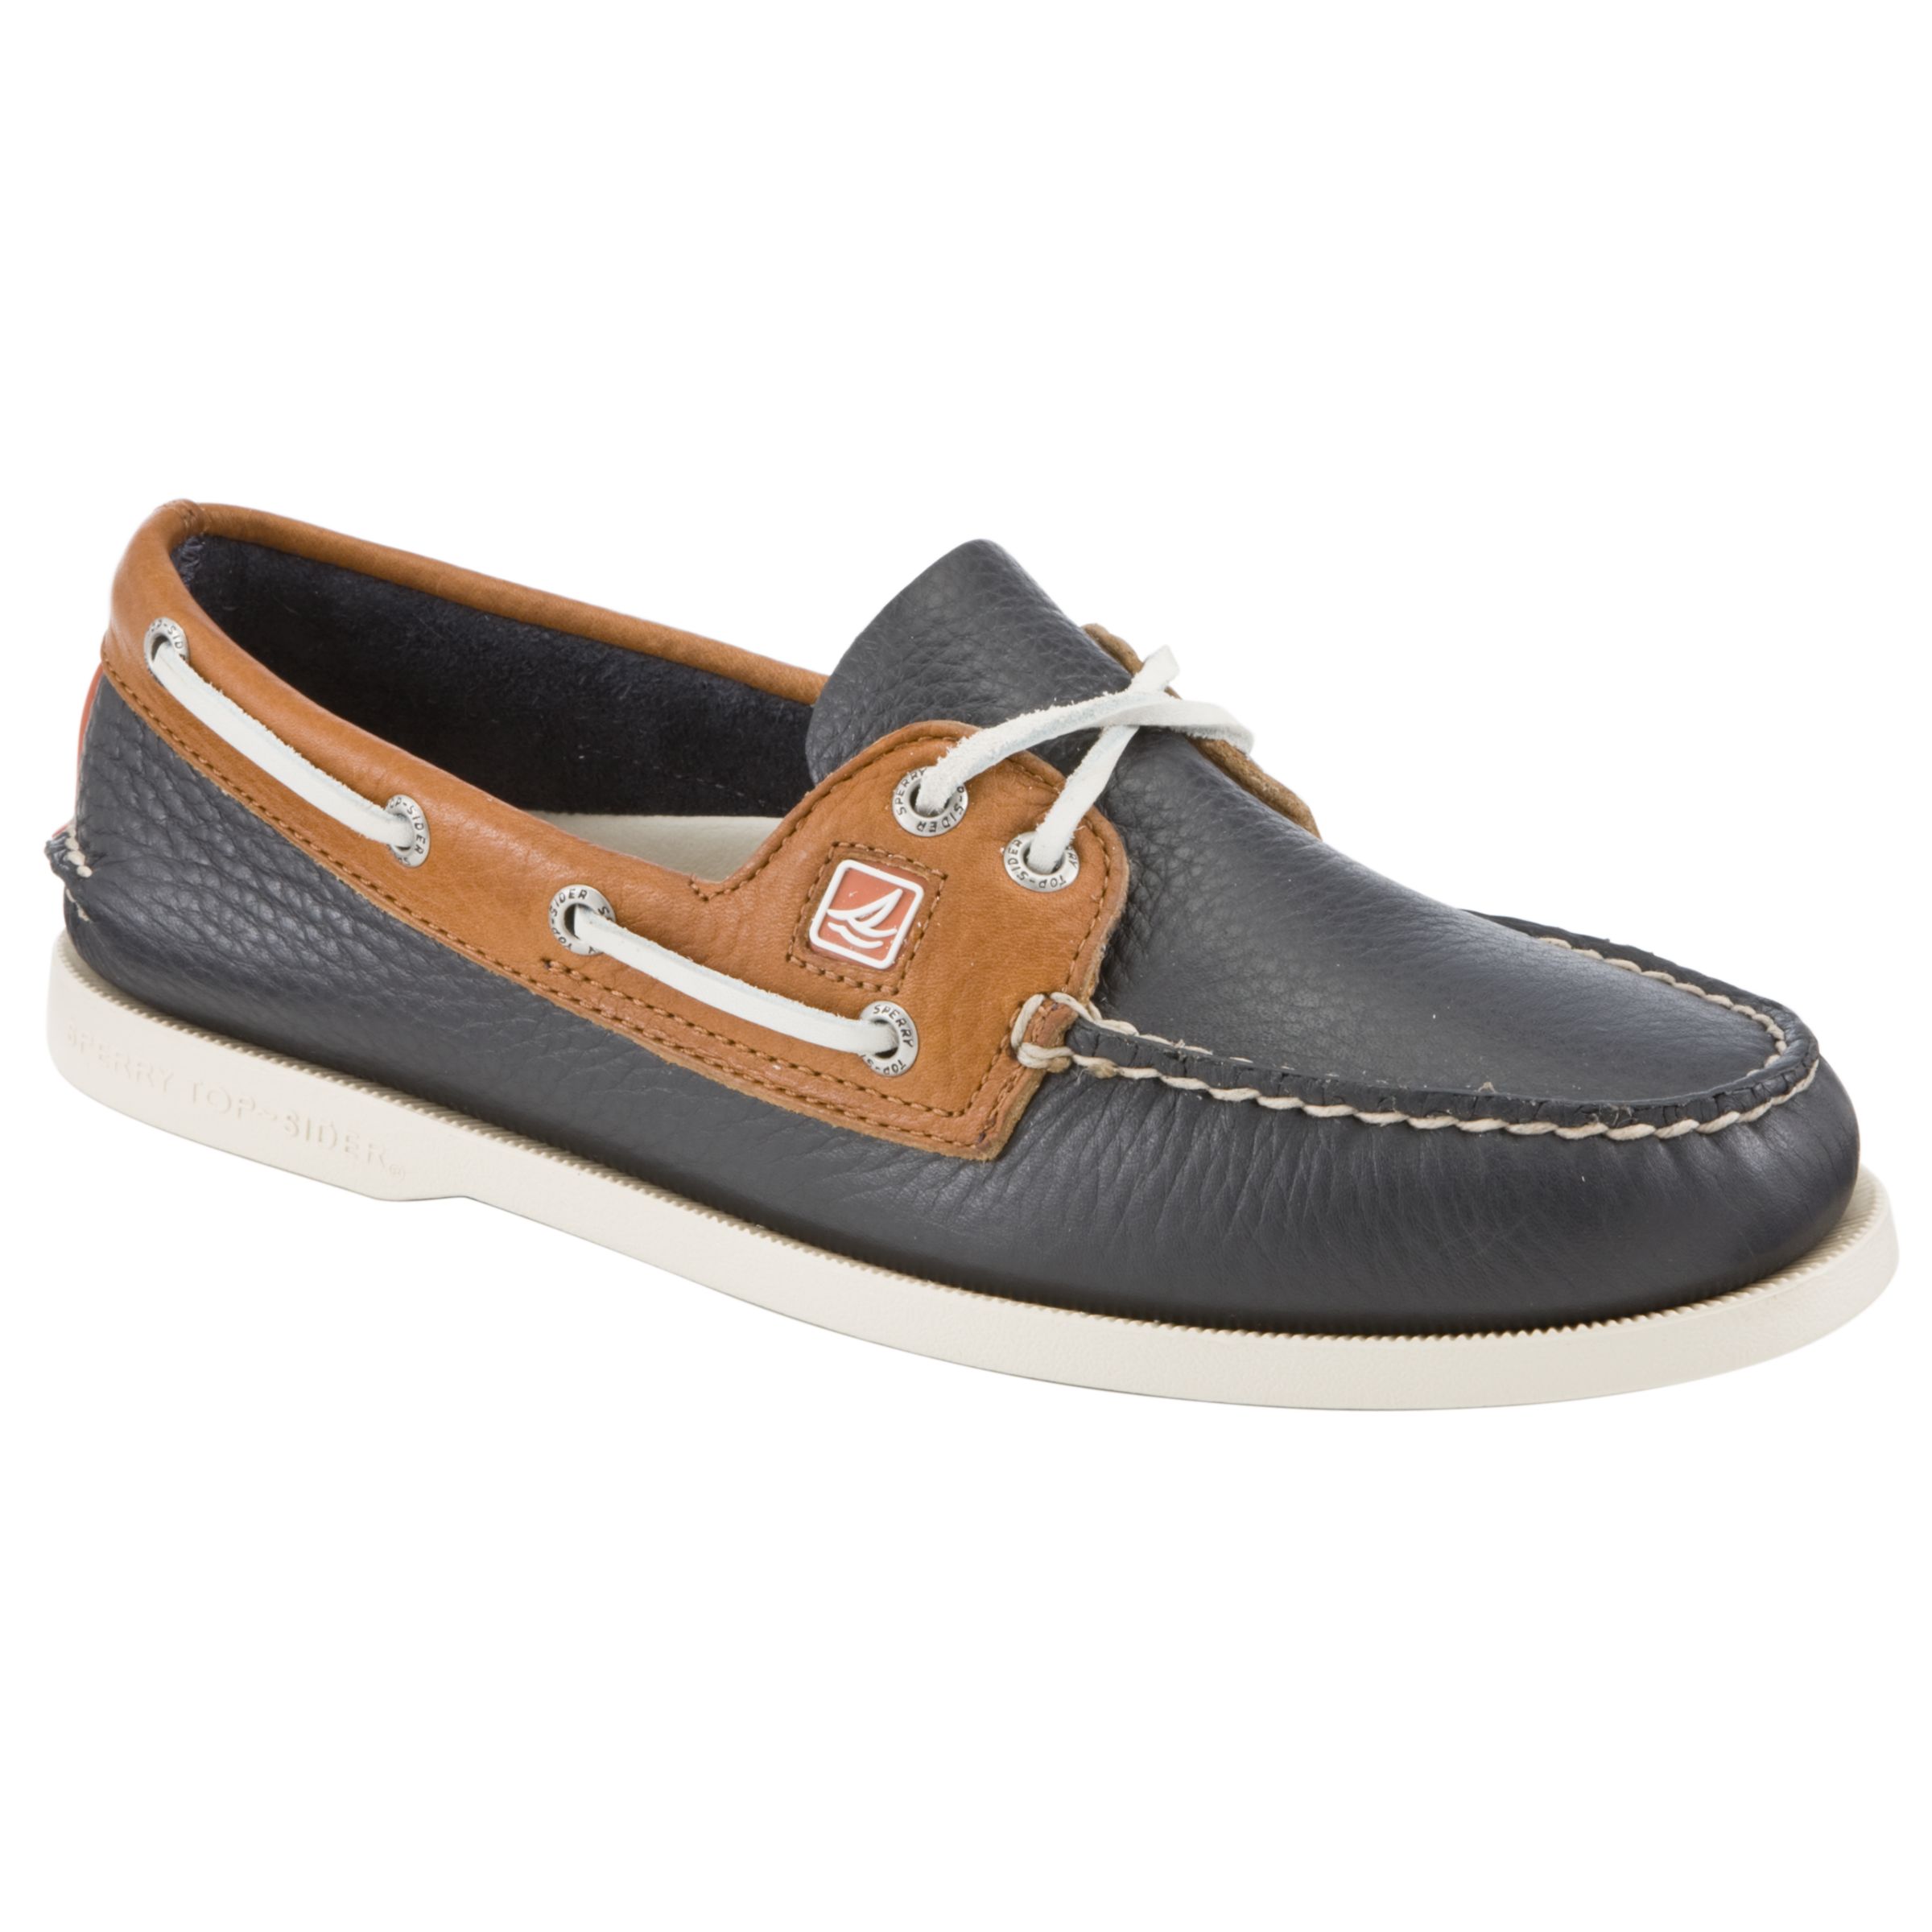 Sperrys and Polos: Spring Has Sprung! - Page 99 - Bodybuilding.com Forums